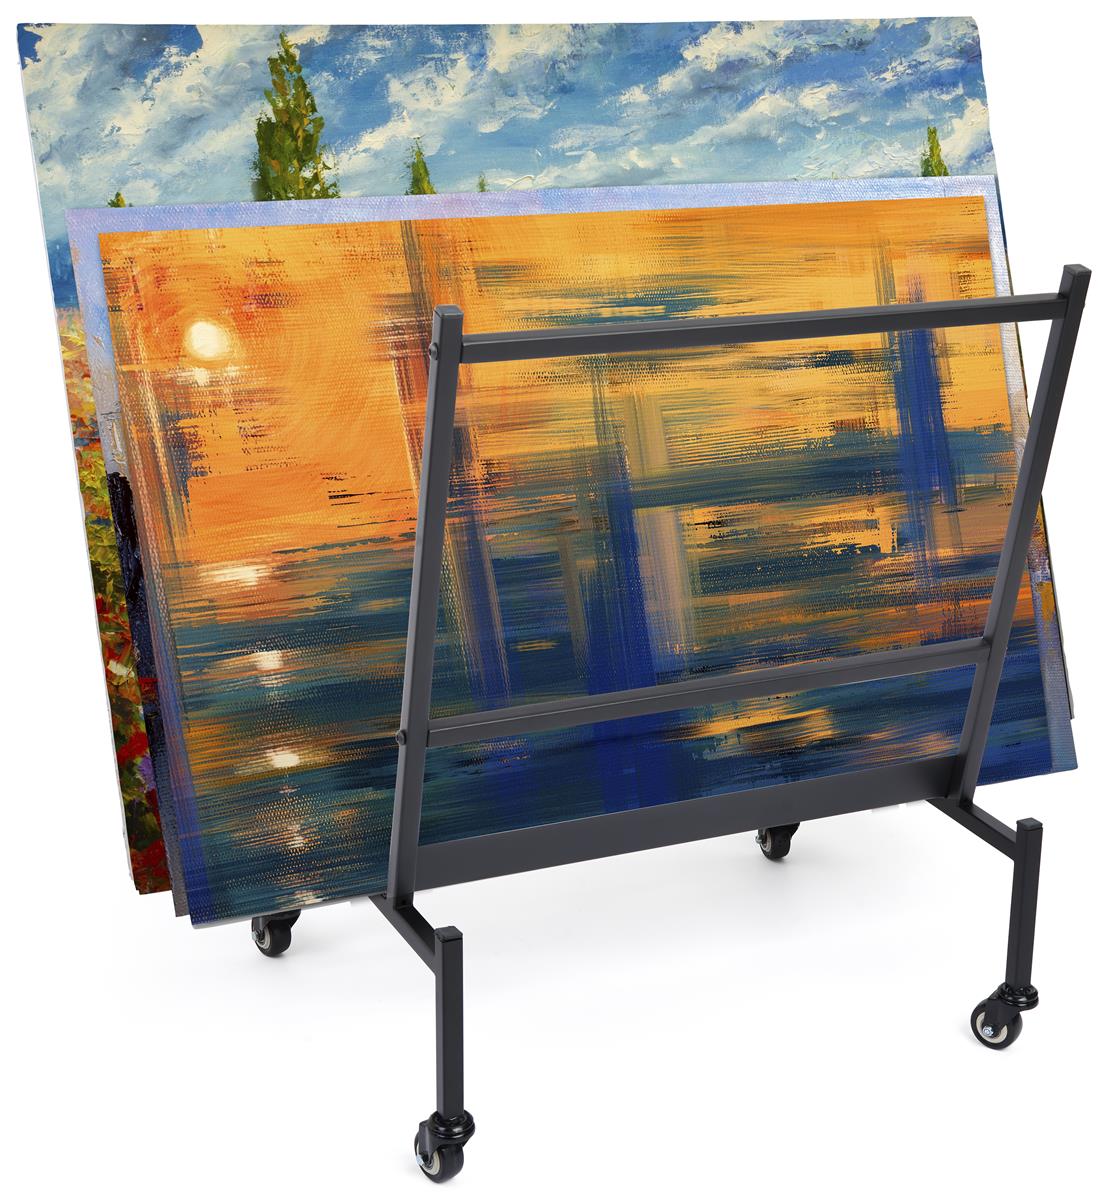 Prints Holds Posters Canvas Art for Shows & Storage Mobile with Rolling Casters Size 22Hx34Wx6D Art Expo Metal Art Professional Print Rack 